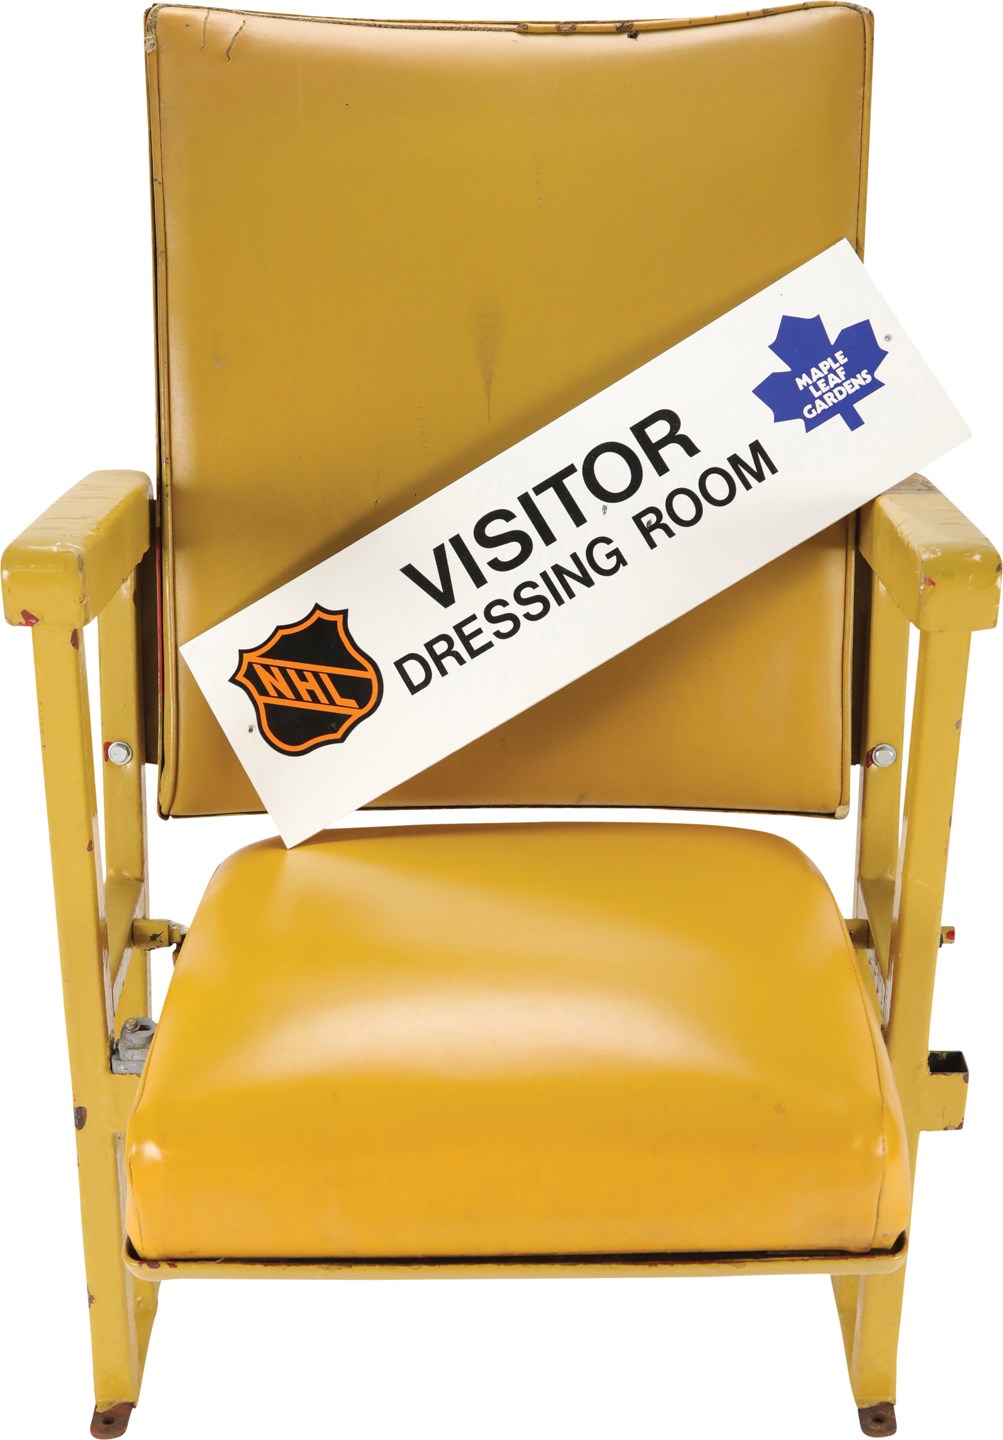 Maple Leaf Gardens Seat and Locker Room Sign